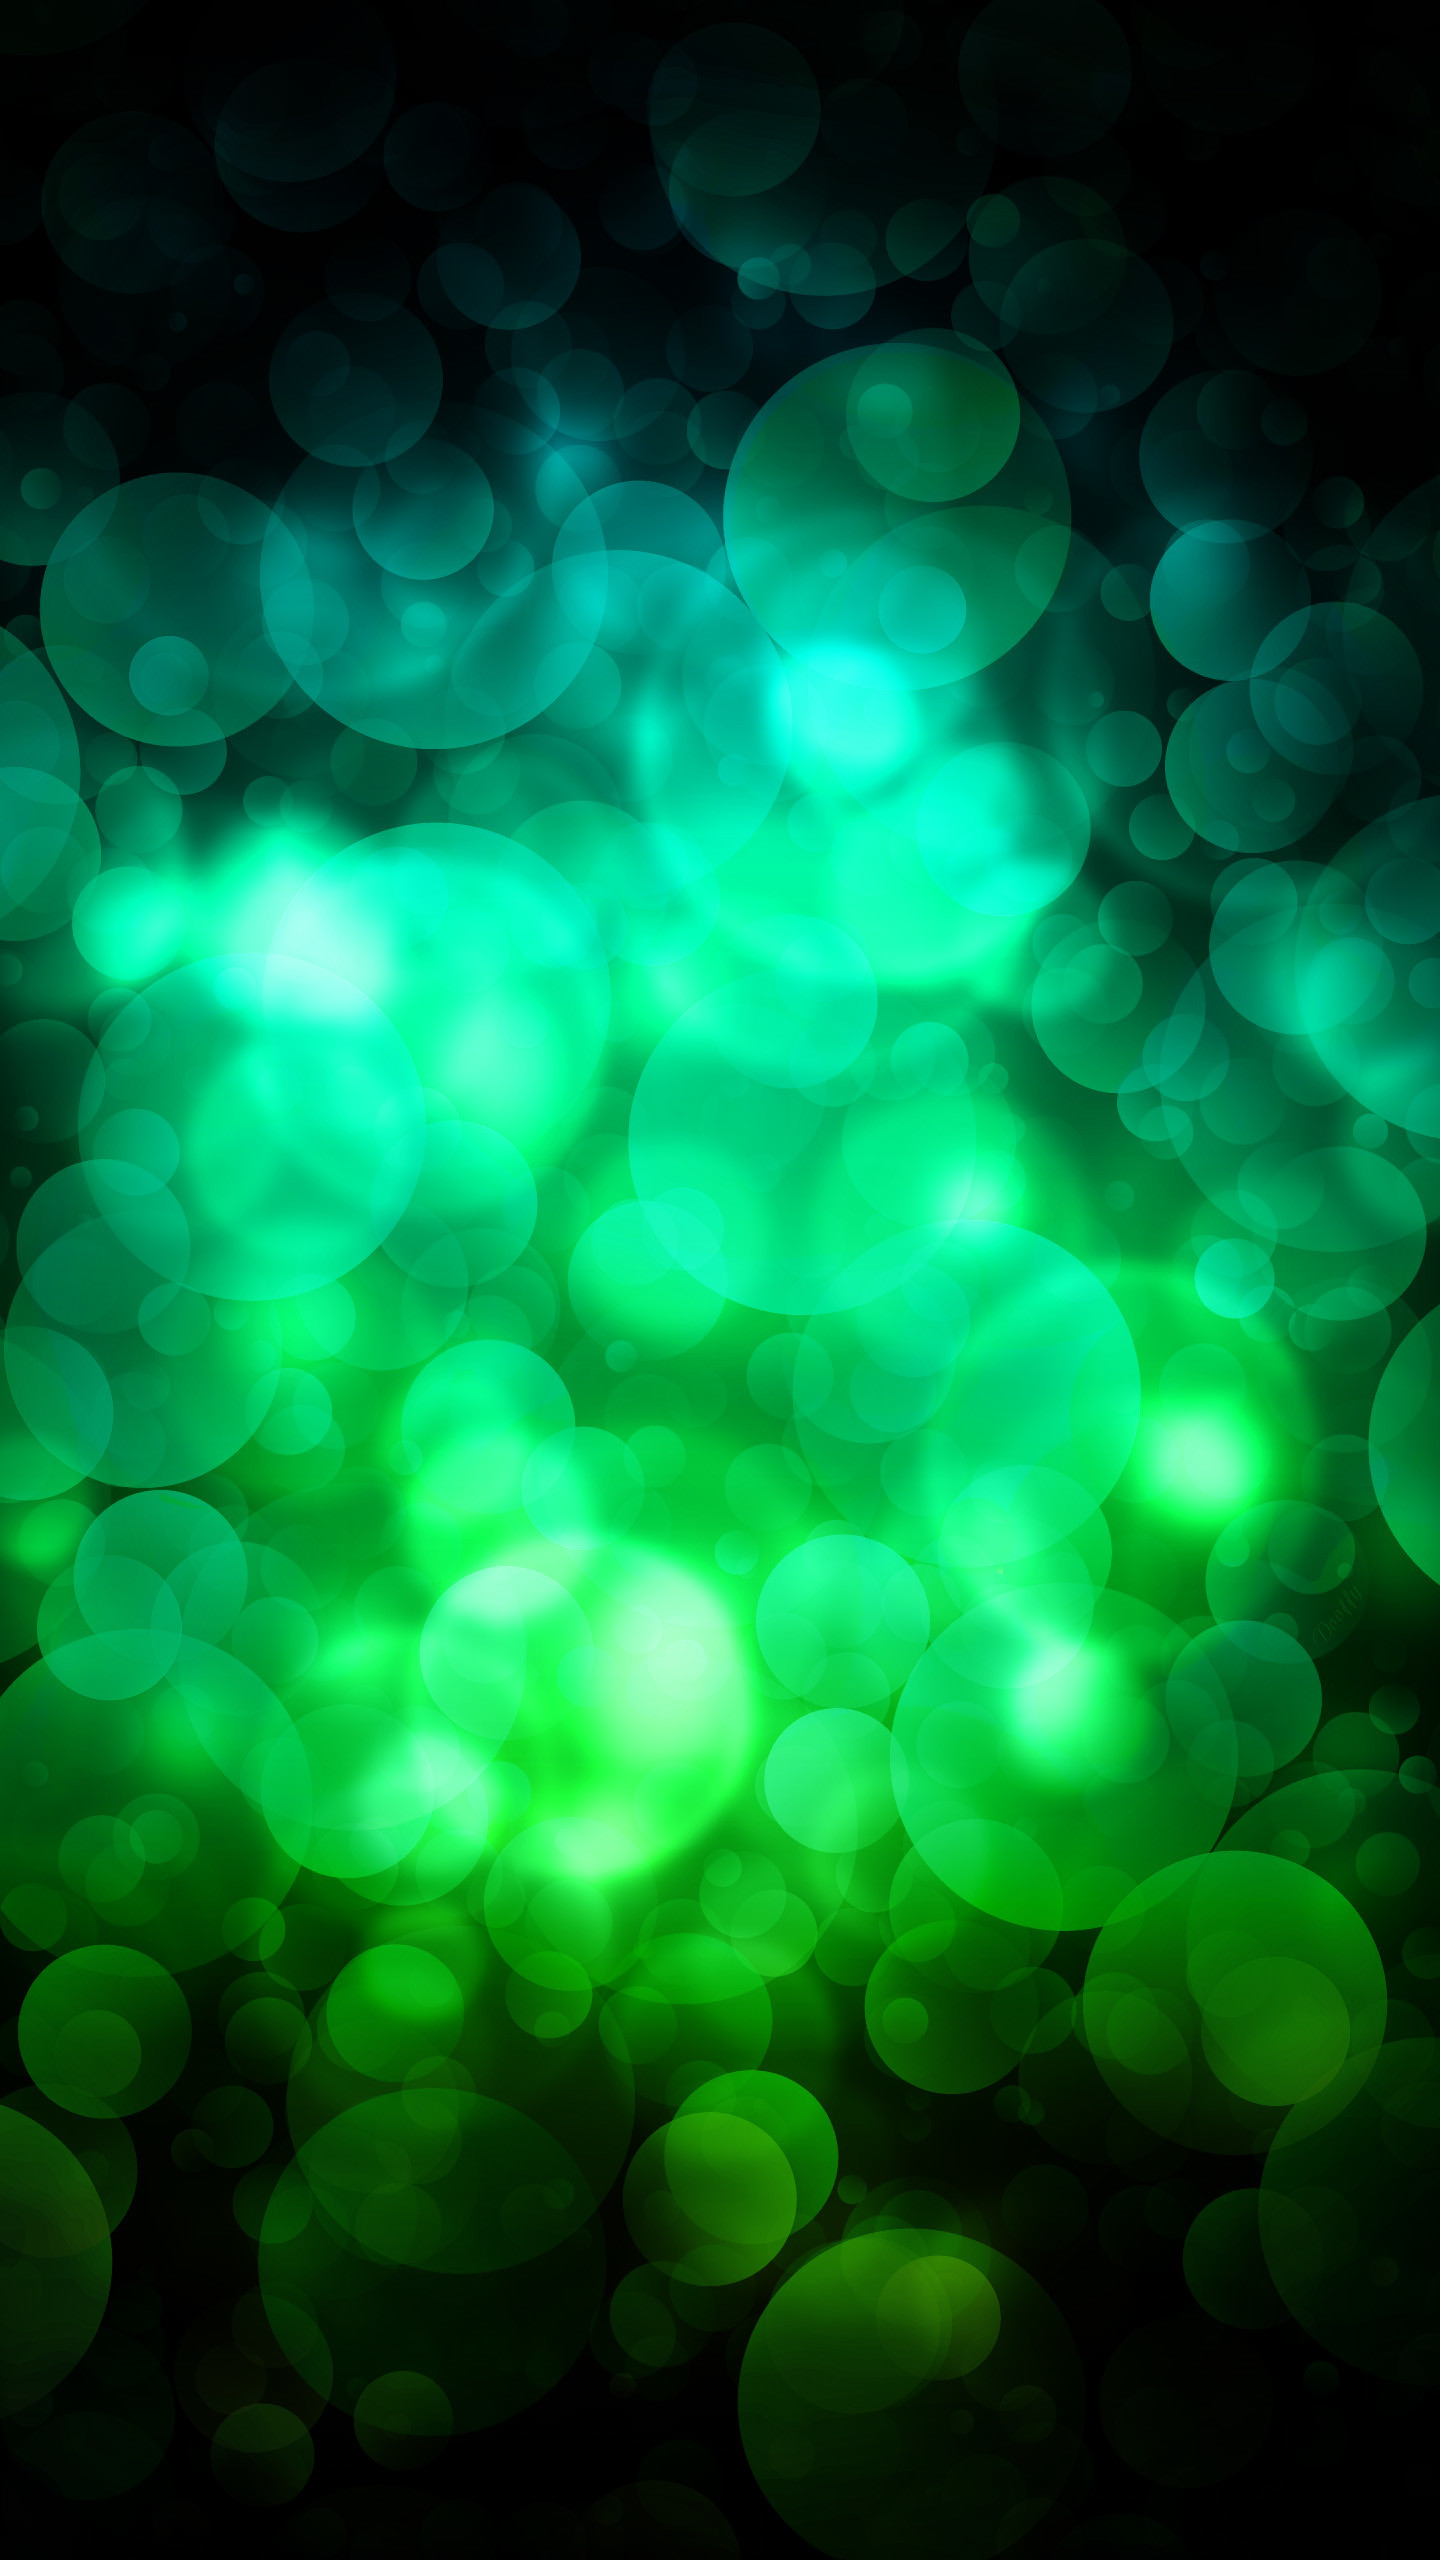 quad hd mobile phone wallpapers green circles